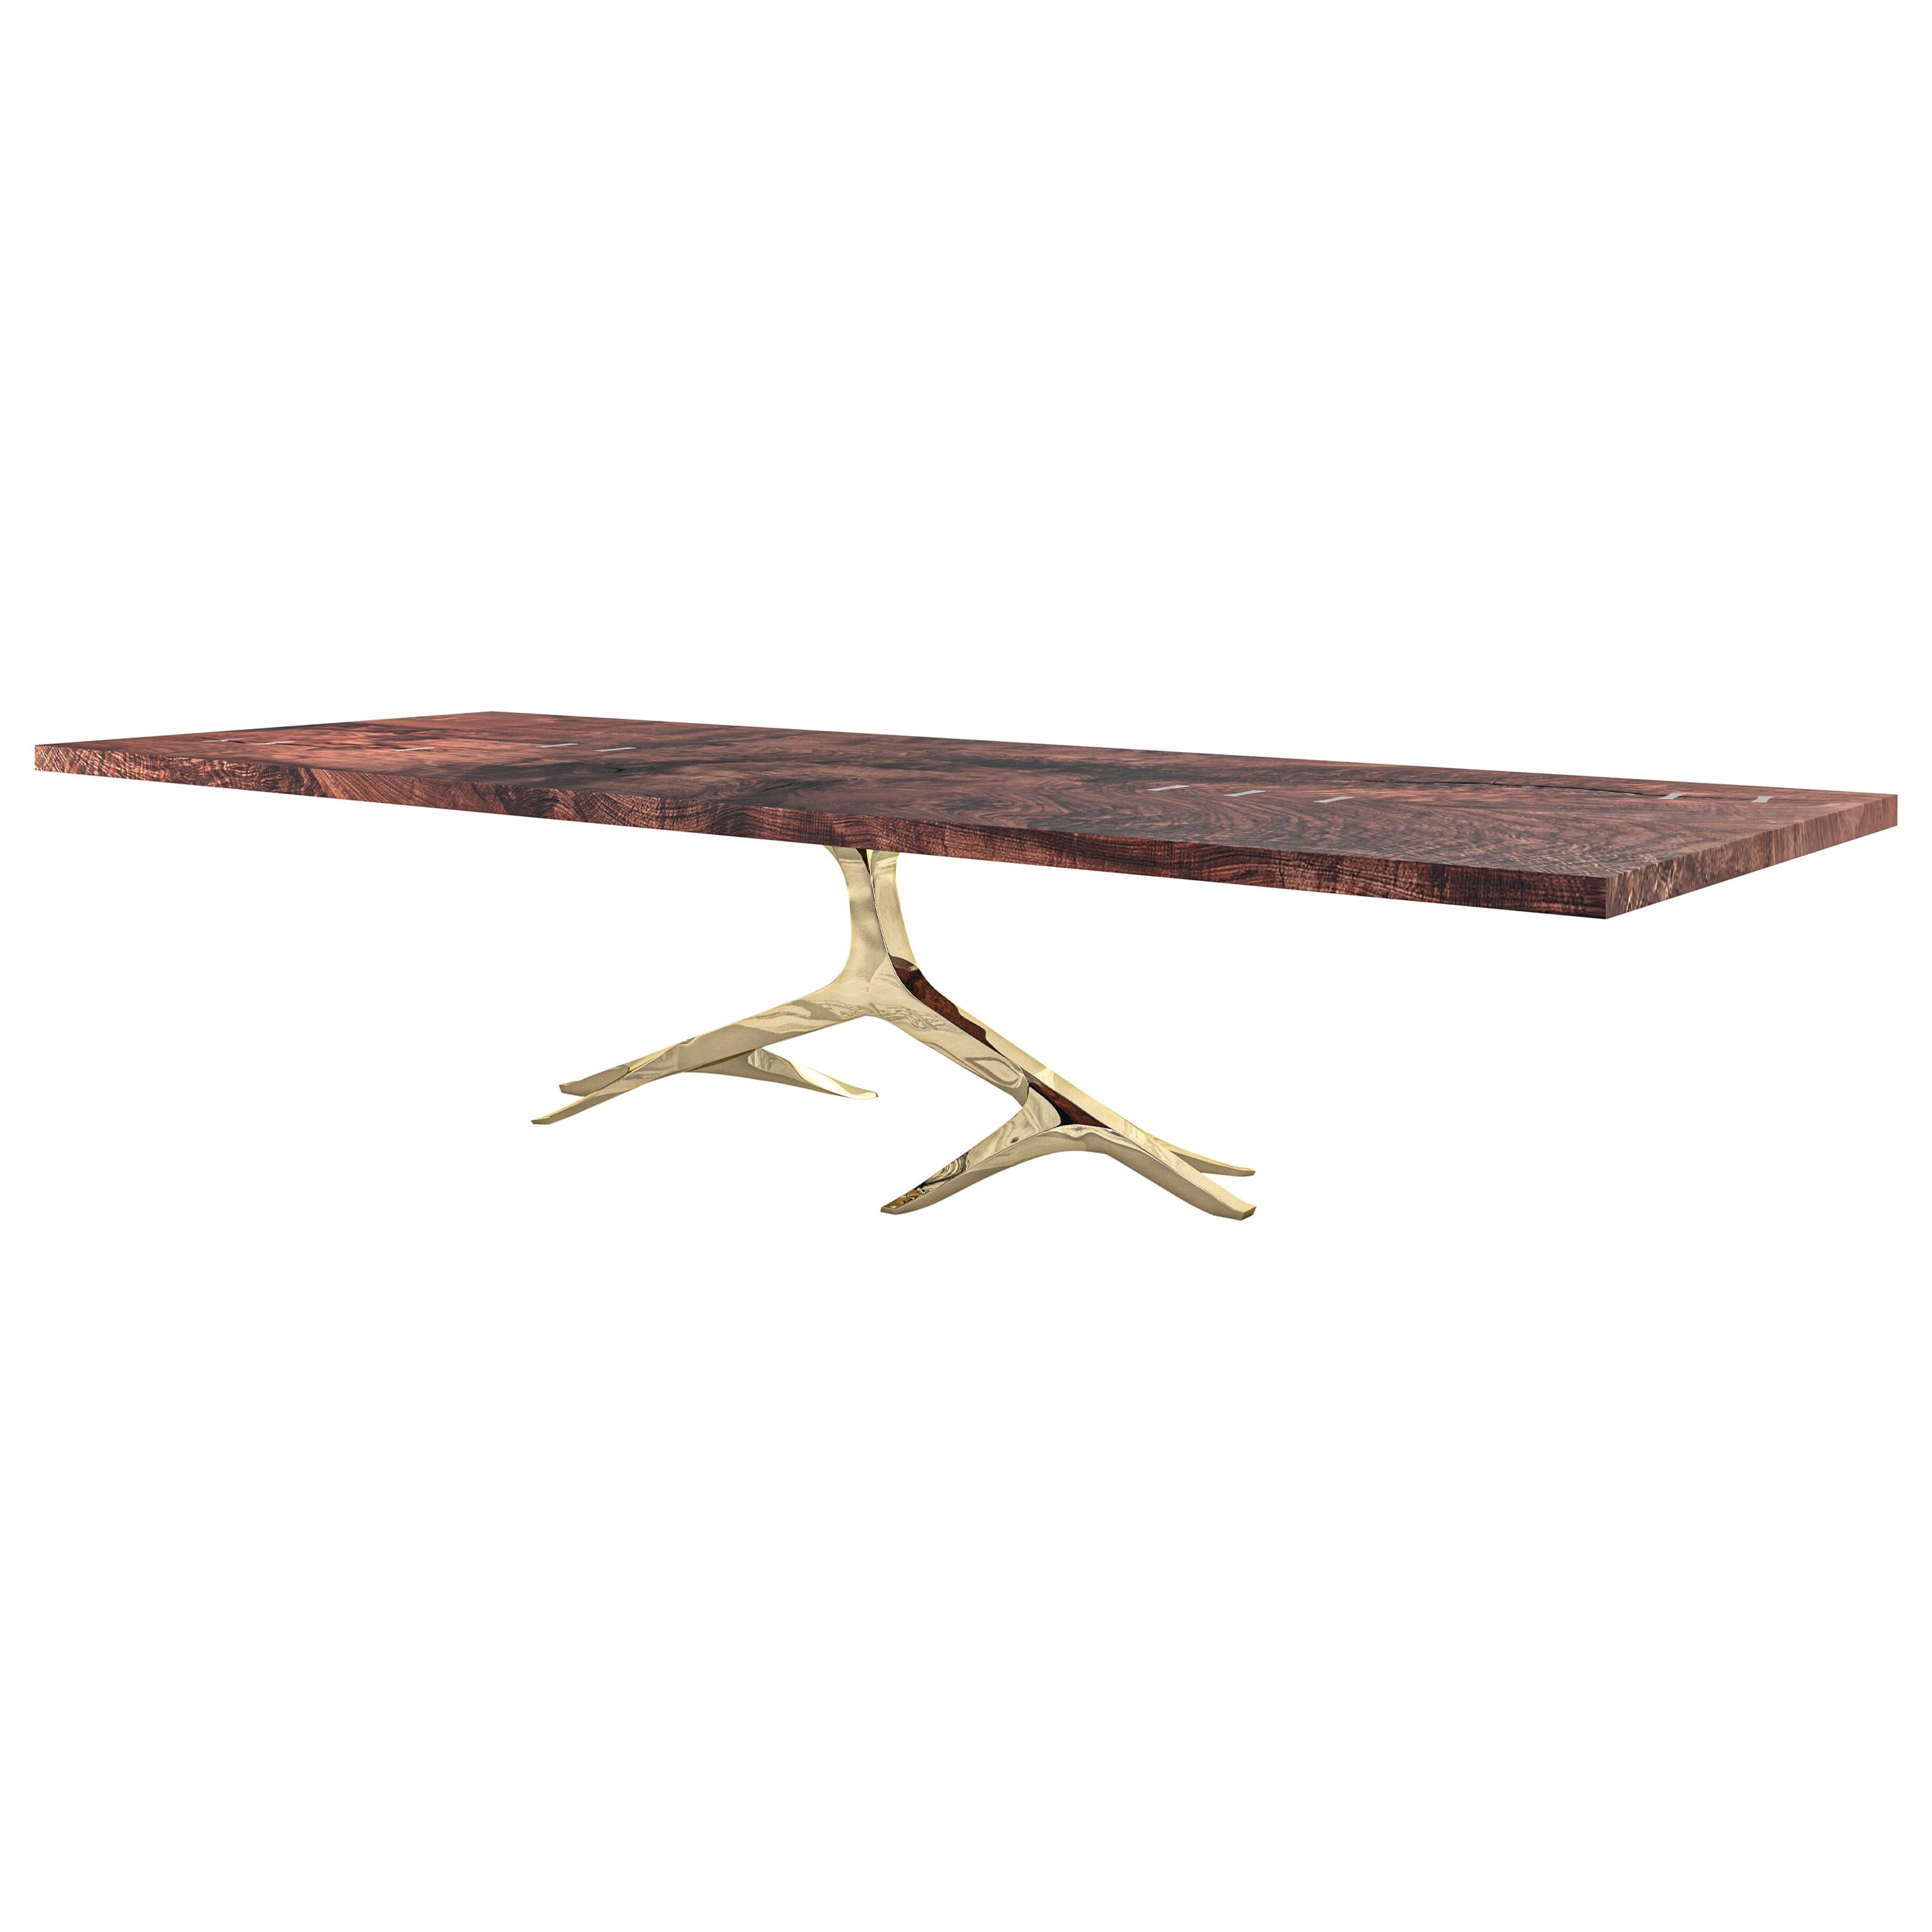 Rose Base Dining Table:  Sculptural Table in Bronze or Stainless Steel